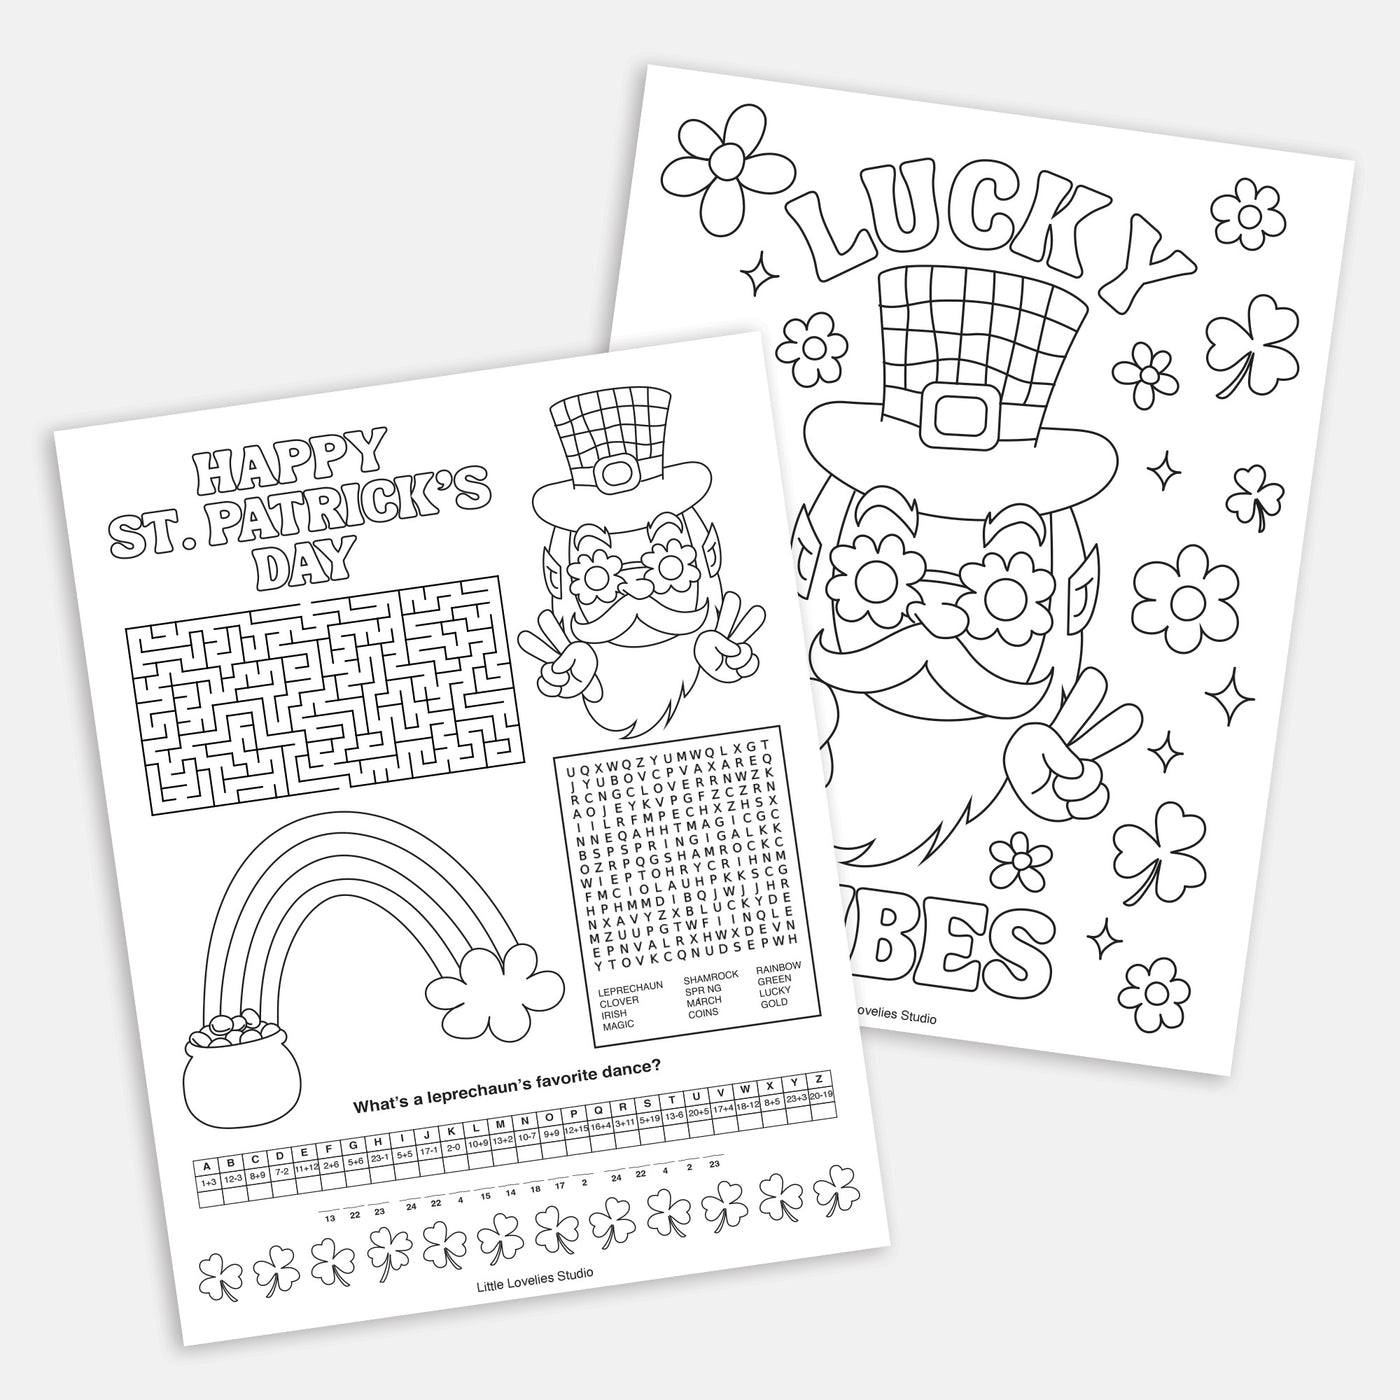 St. Patrick's Day Activity Sheet & Coloring PAge